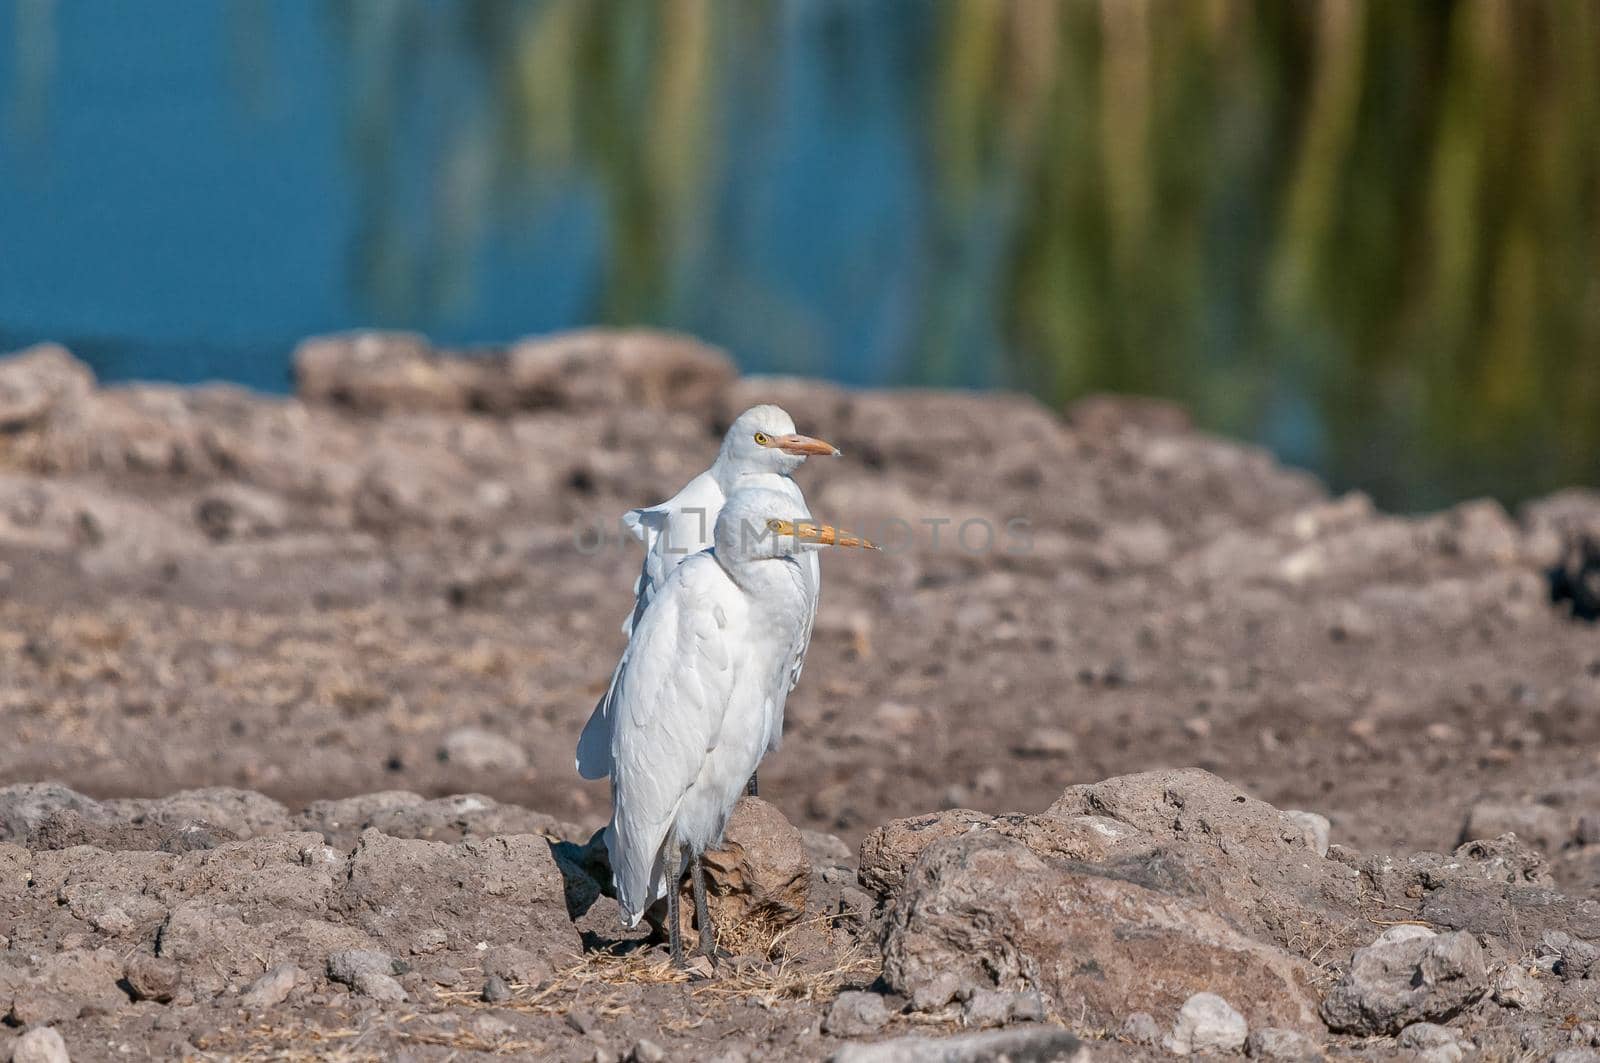 Two cattle egrets, Bubulcus ibis, at a waterhole in northern Namibia